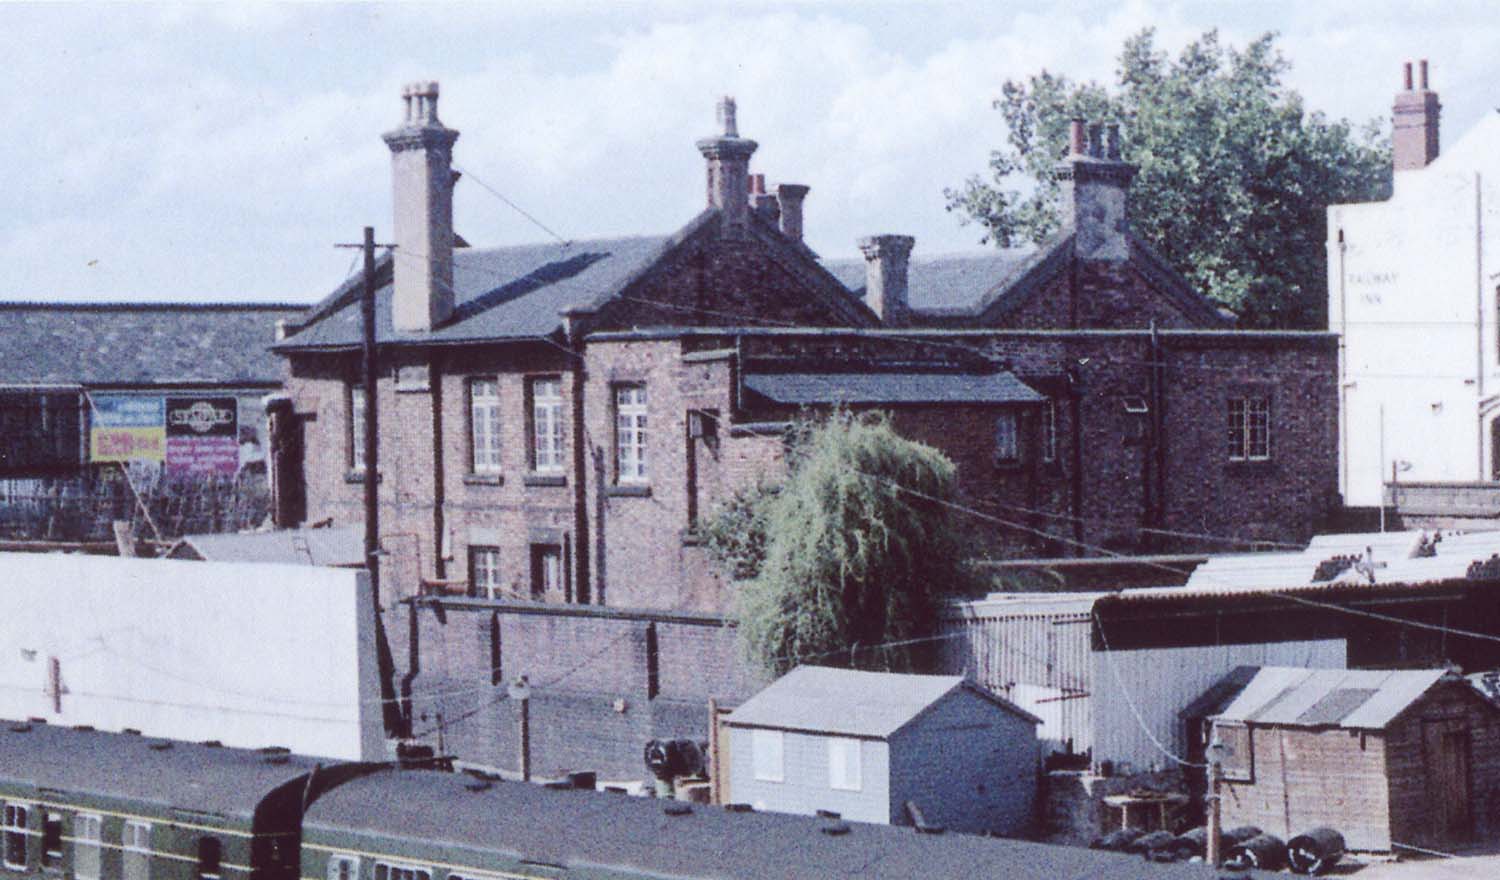 Close up showing the rear of the original 1838 station building which remained in use as accommodation for station staff until 1959